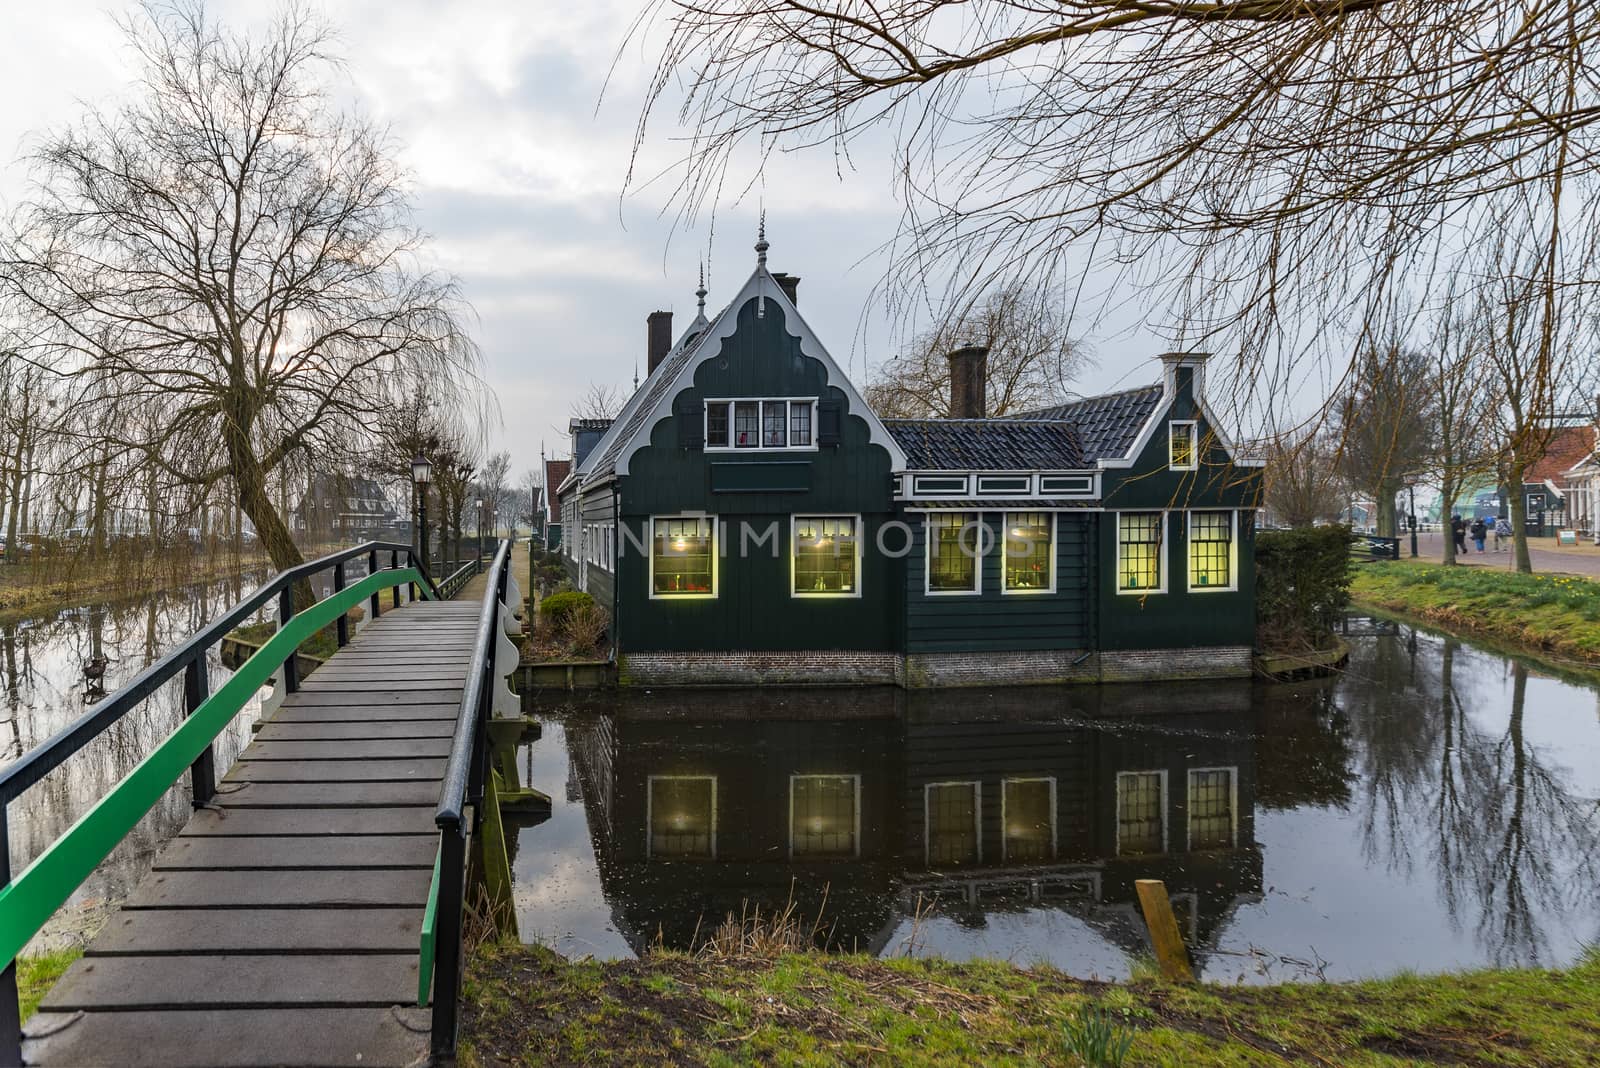 Beautiful and typical Dutch wooden houses architecture mirrored on the calm canal of Zaanse Schans located at the North of Amsterdam, Netherlands by ankorlight